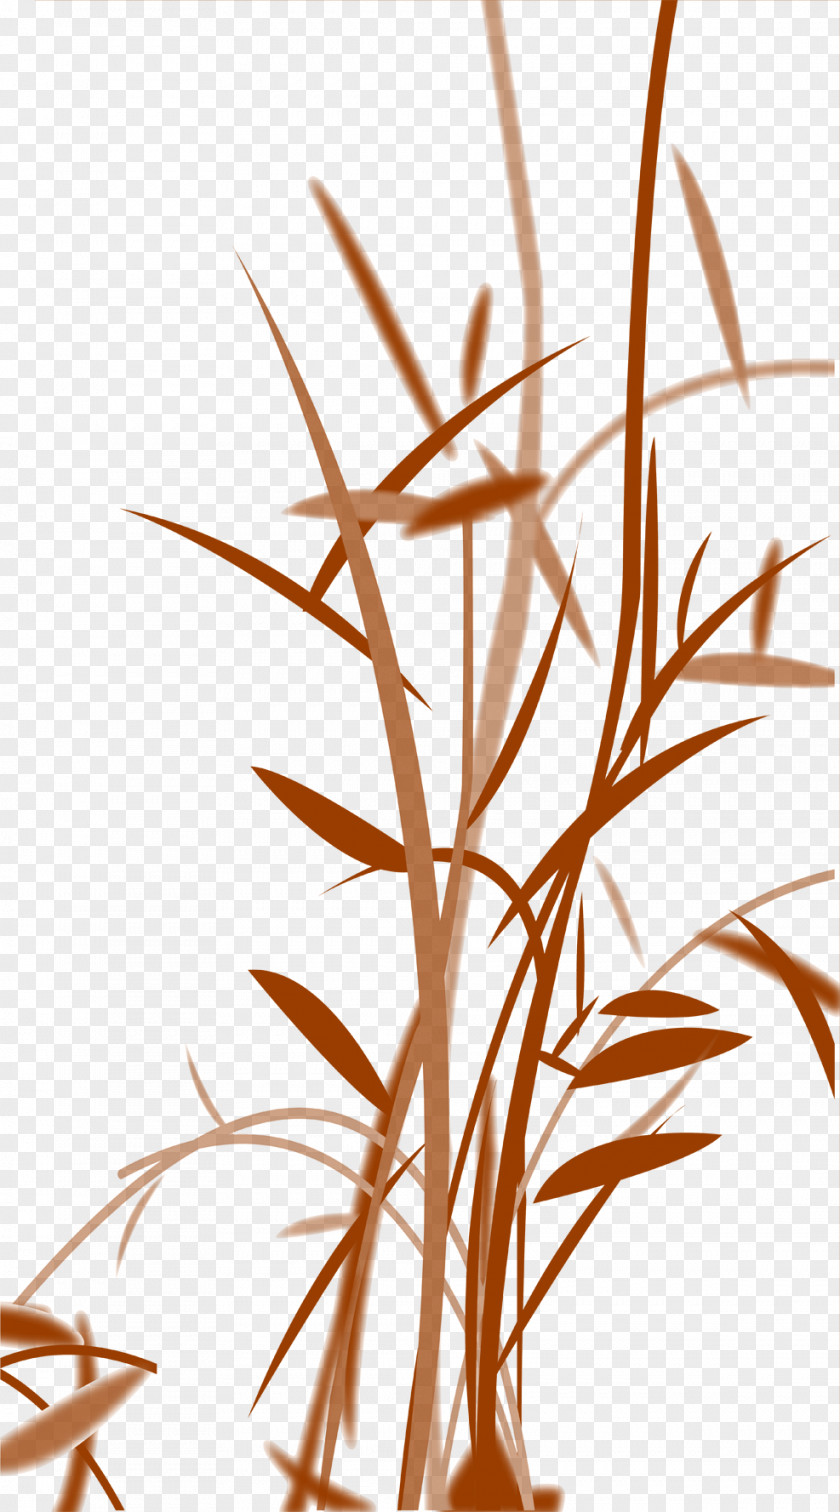 Khaki Ink Bamboo Leaf Decoration Bamboe Euclidean Vector PNG